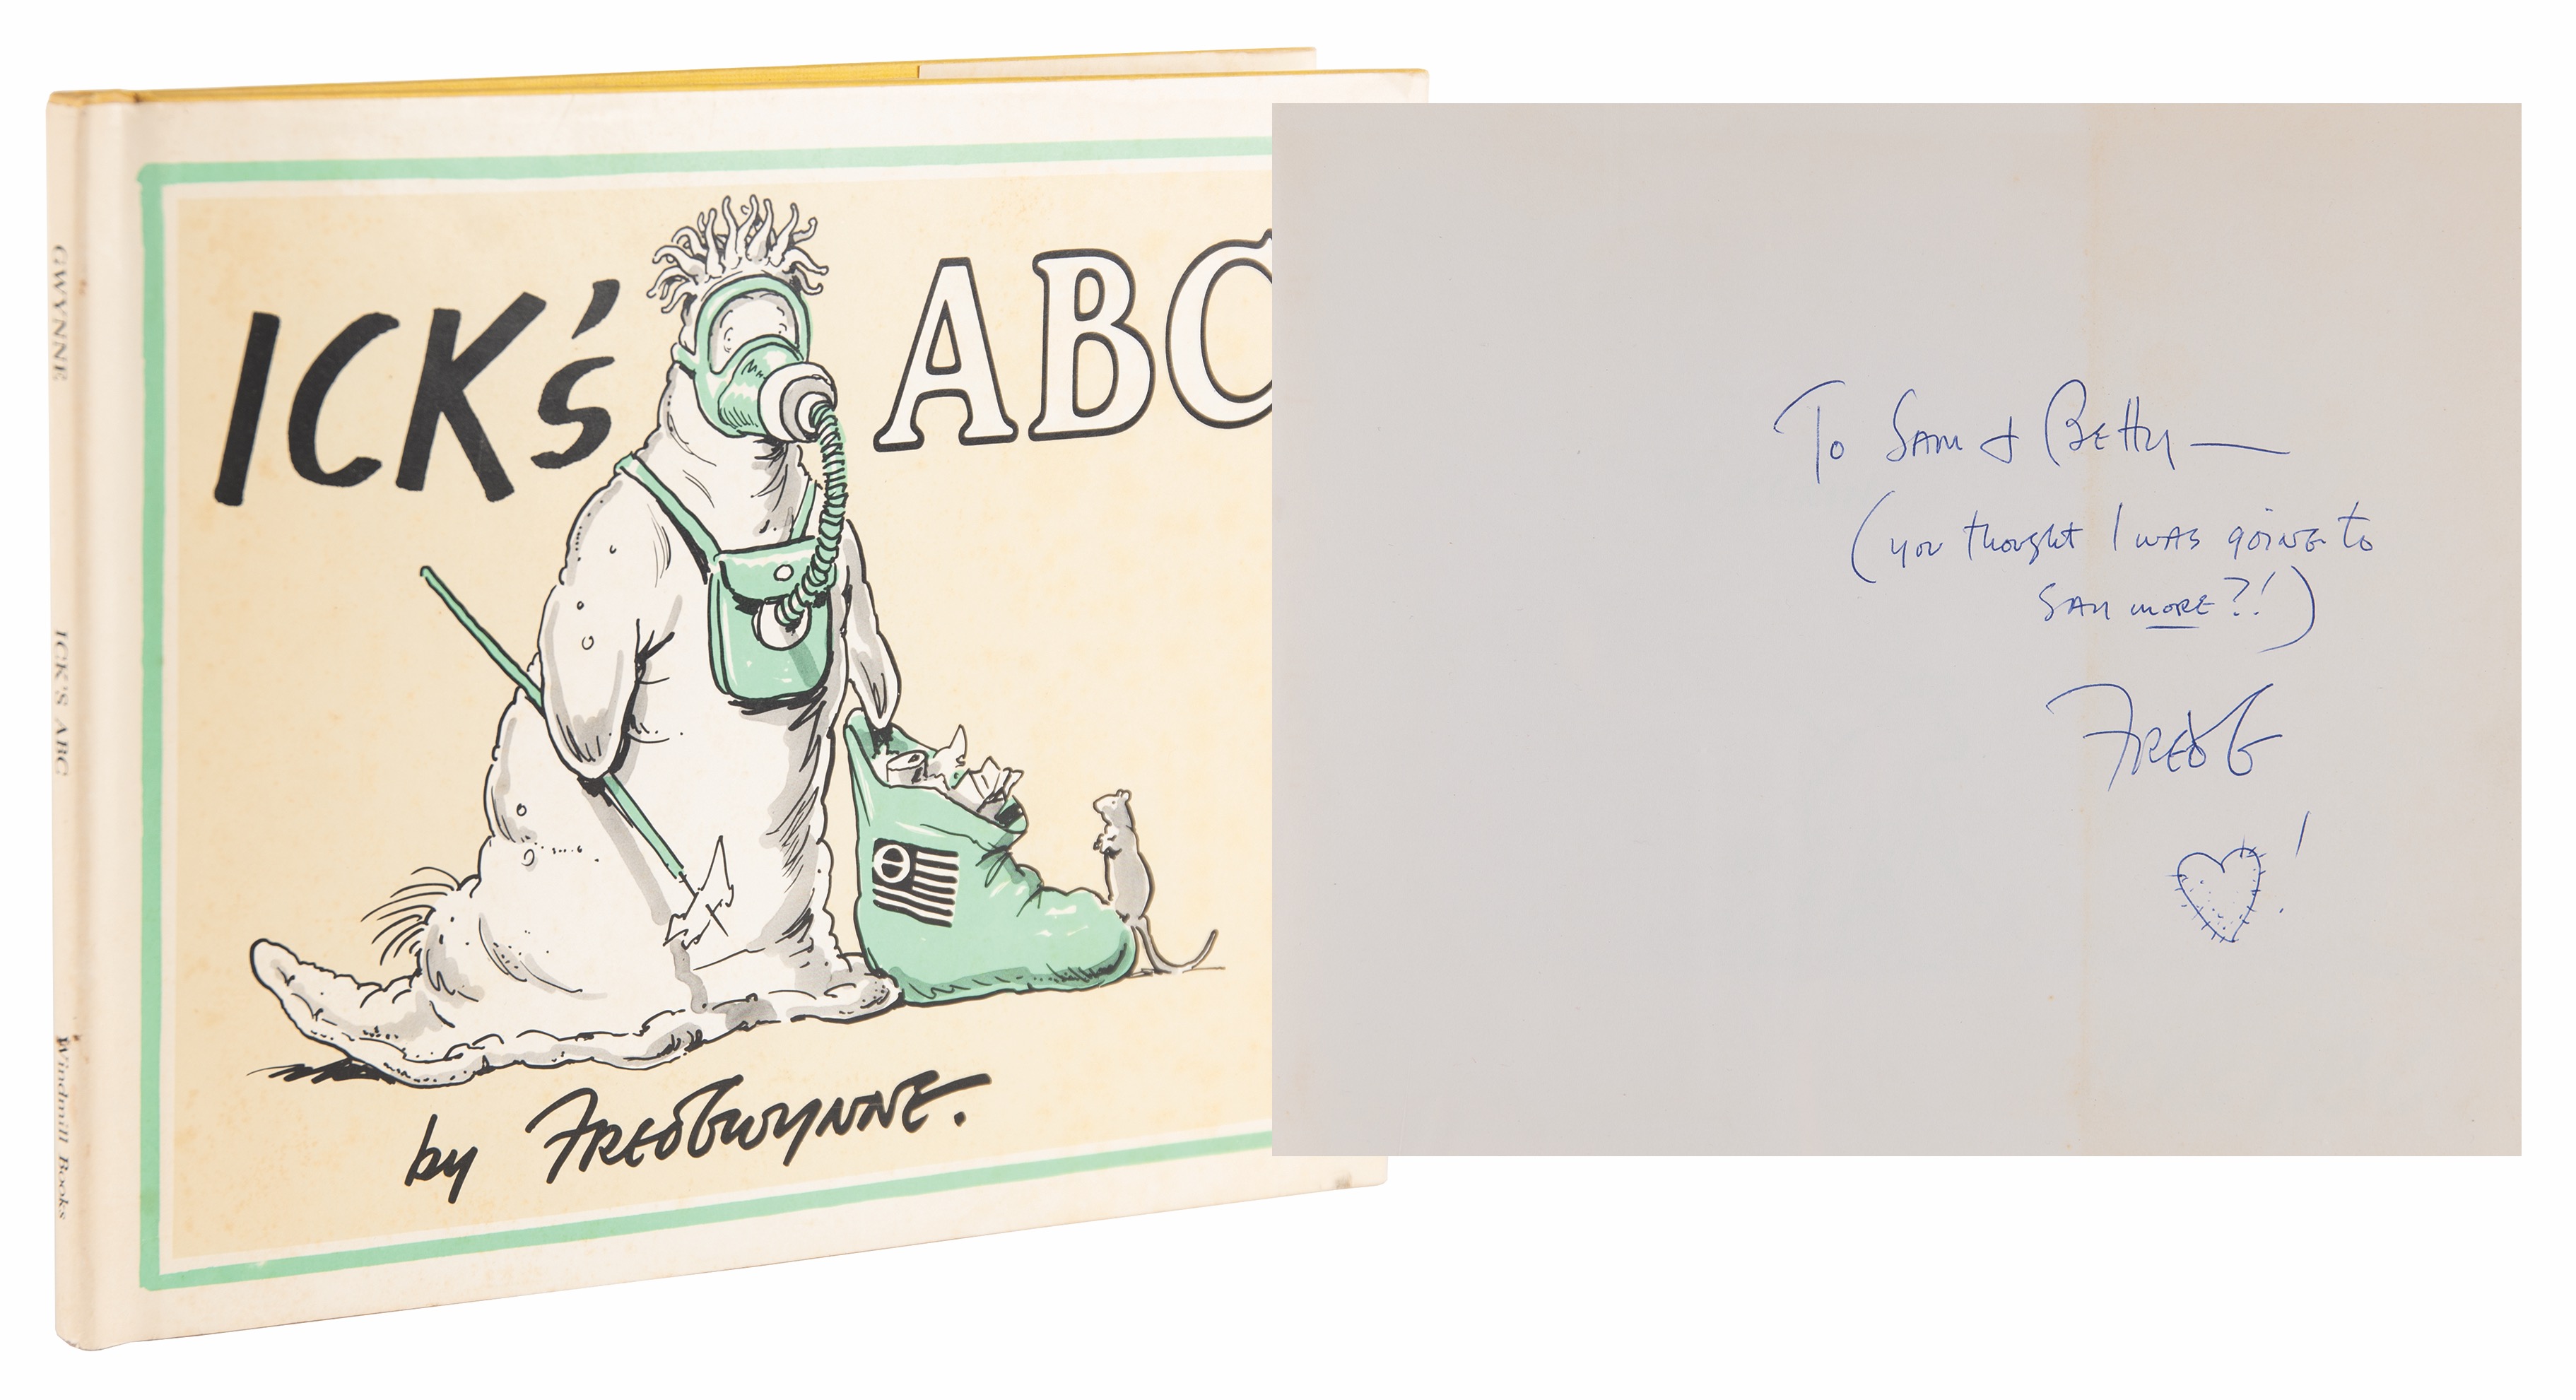 Lot #808 Fred Gwynne Signed Book - Ick's ABC - Image 1